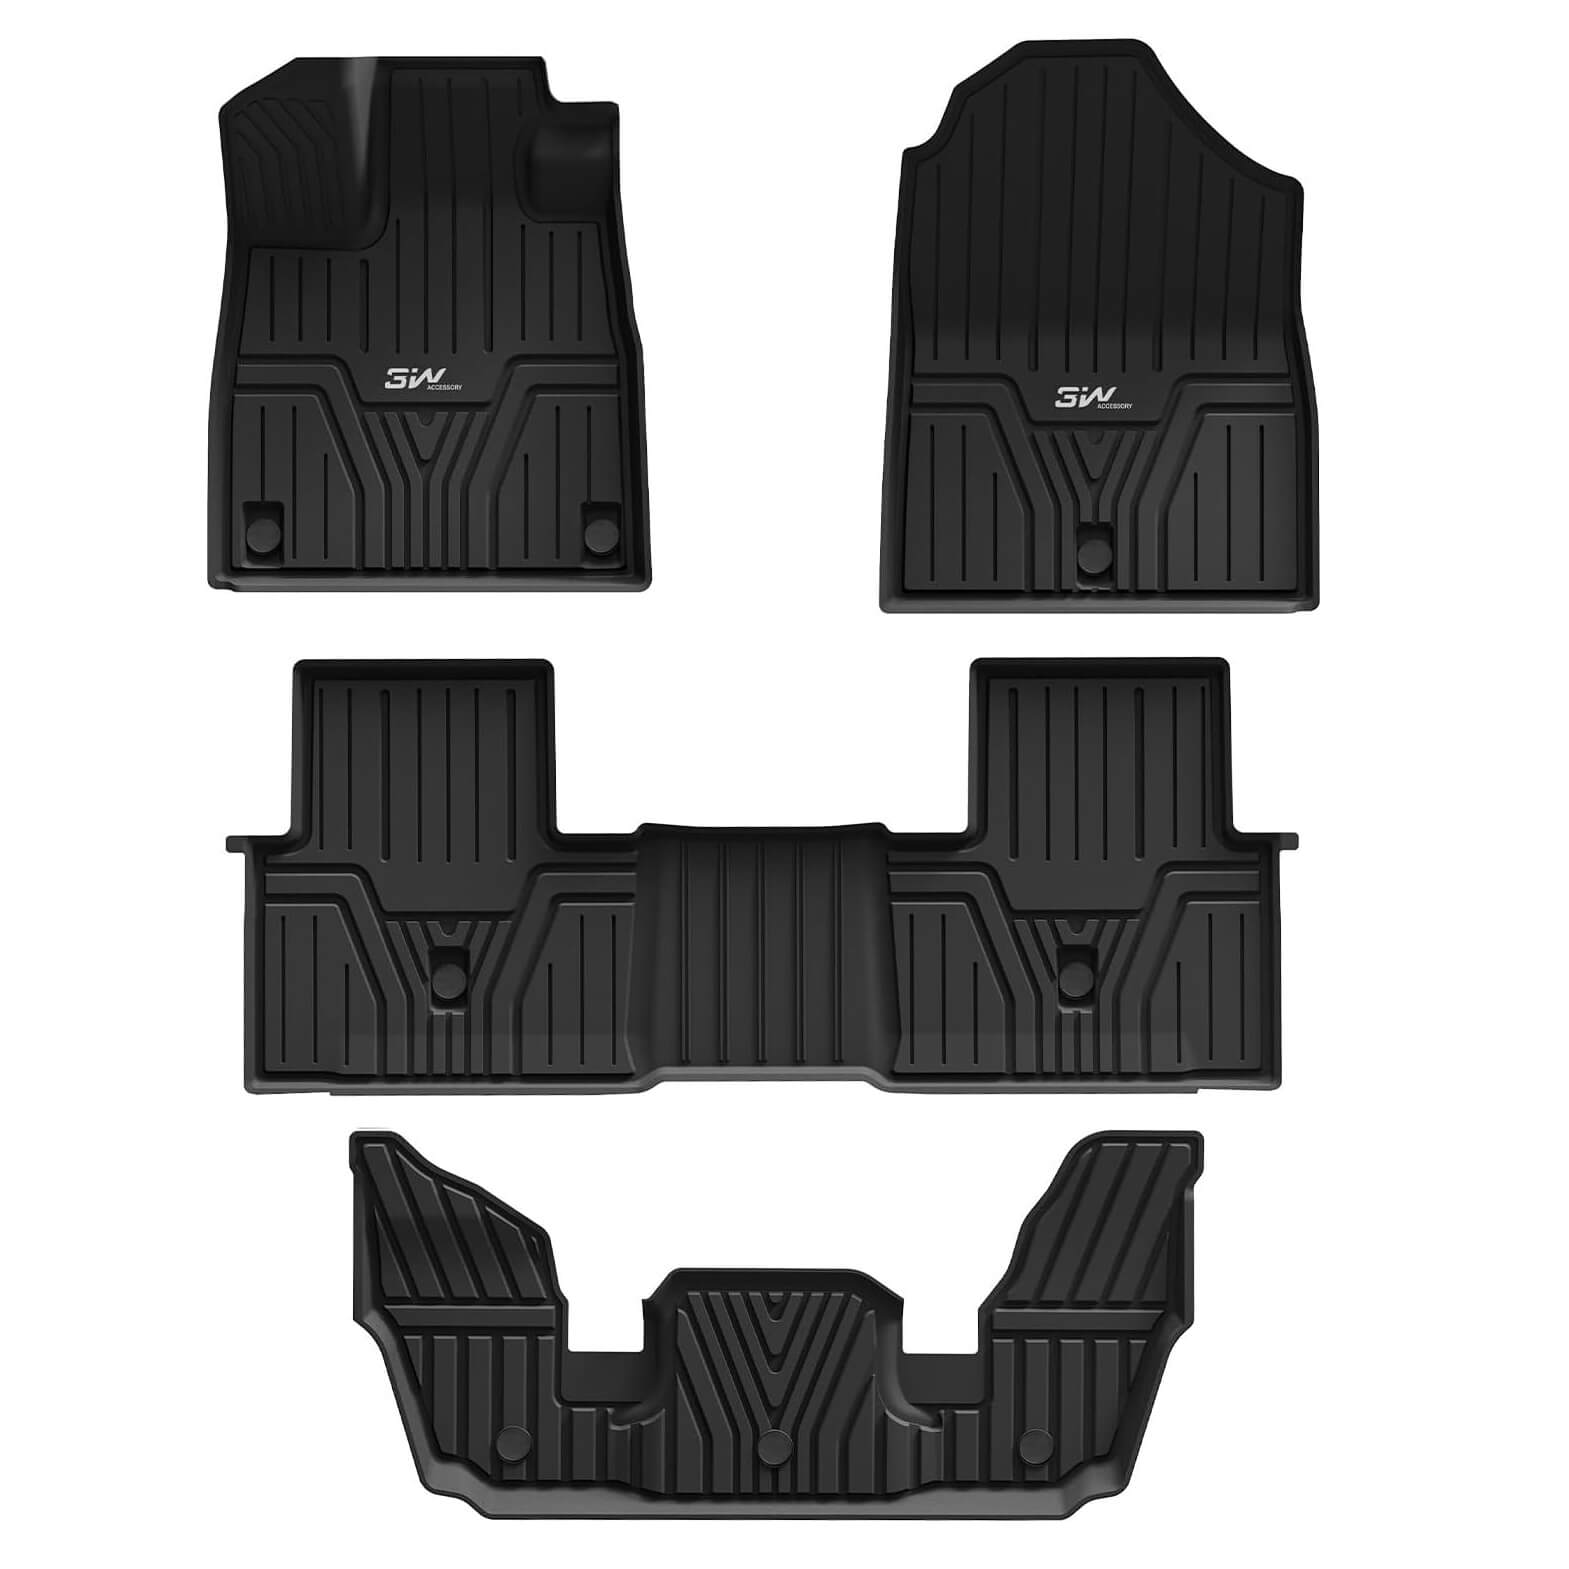 3W Honda Pilot 2023 2024 Custom Floor Mats TPE Material & All-Weather Protection Vehicles & Parts 3Wliners 2023-2024 Pilot 2023-2024 1st&2nd&3nd Row Mats